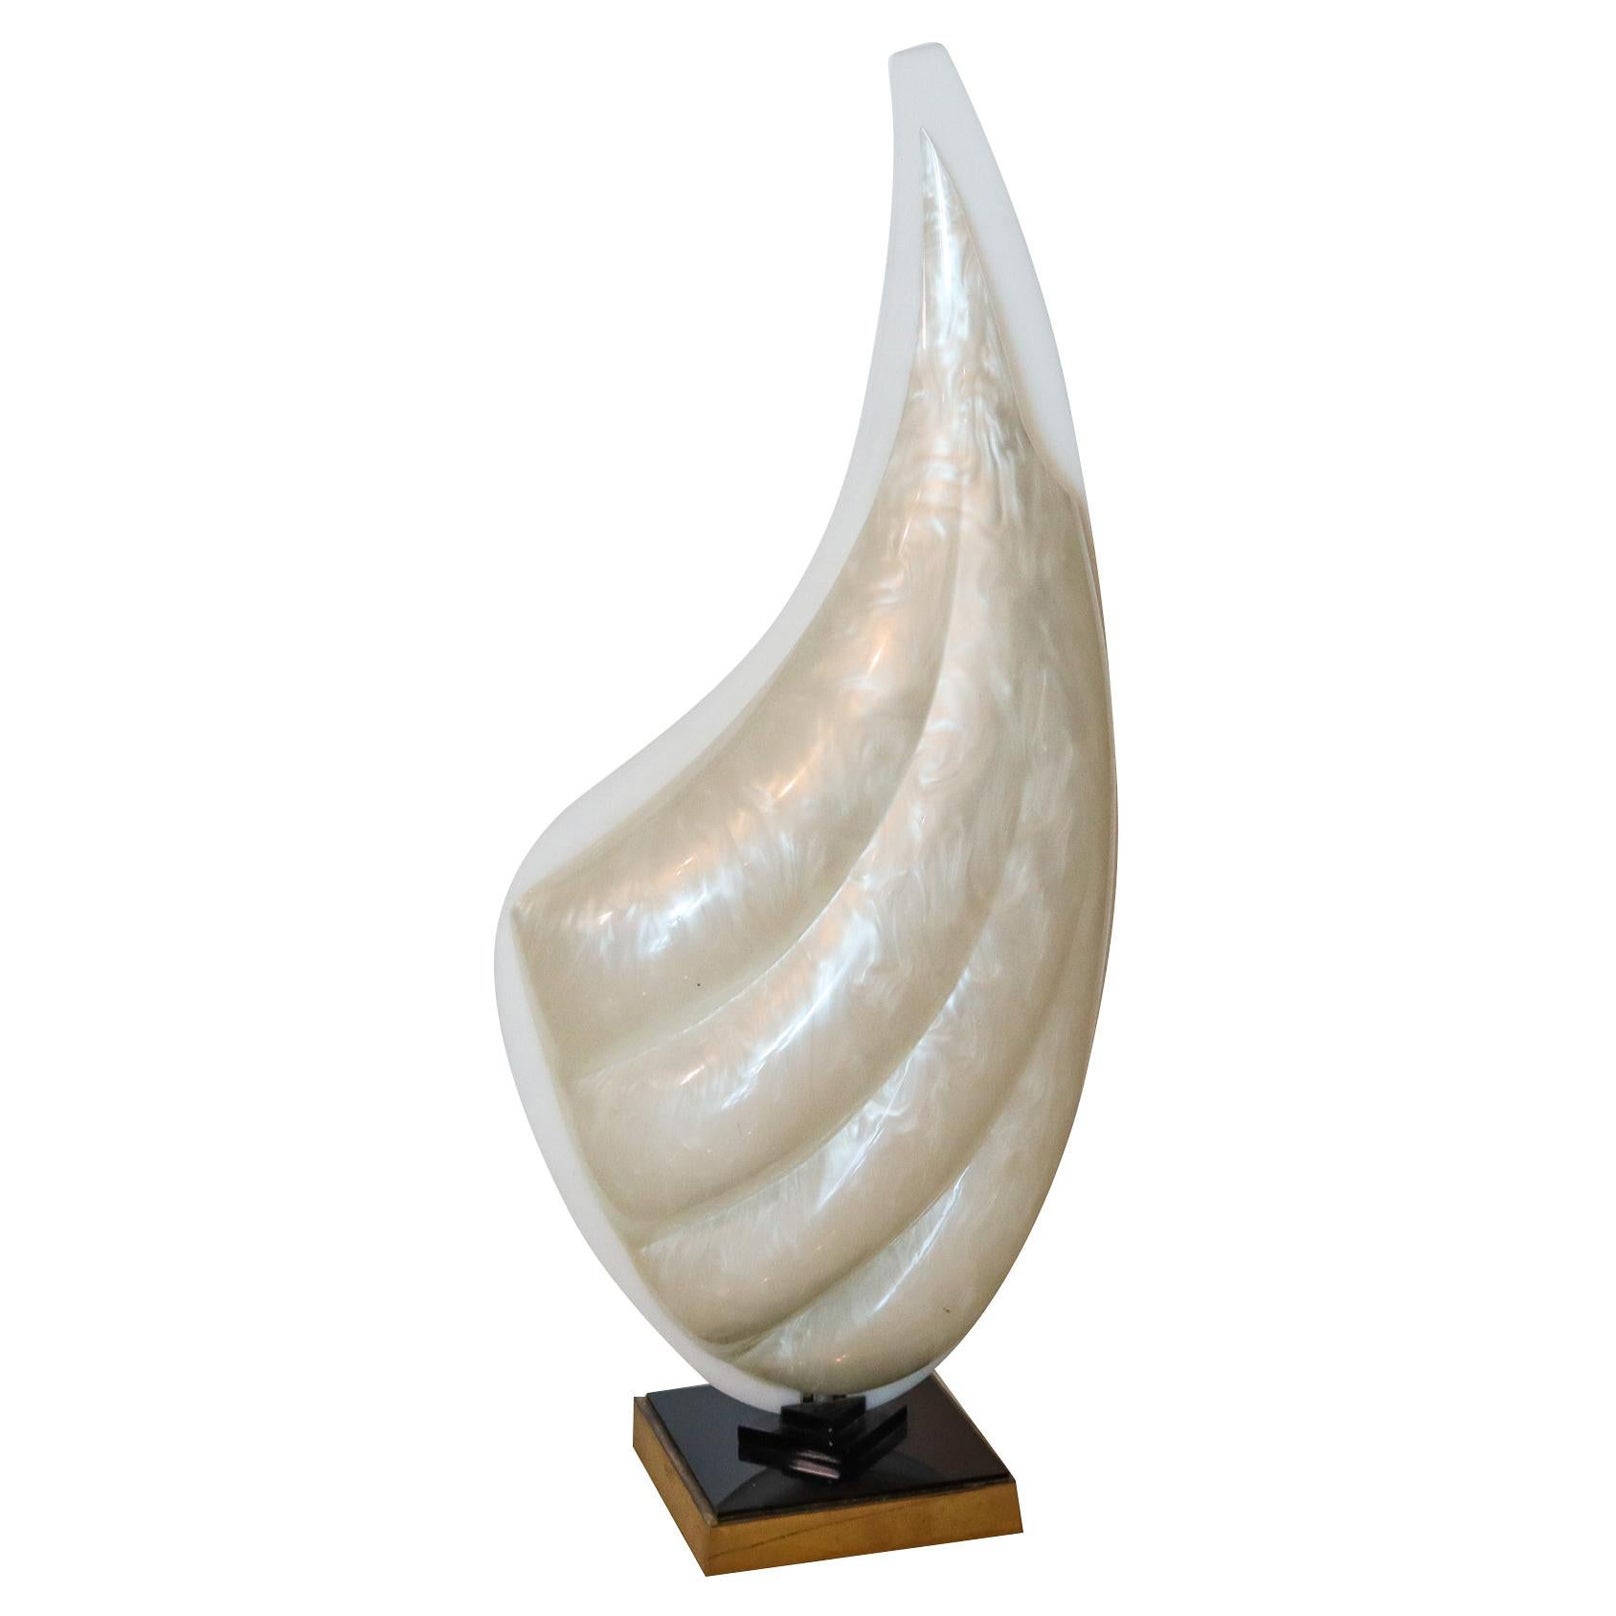 Roger Rougier 1970 Single Modernist Table Acrylic Lamp in Clam Shaped